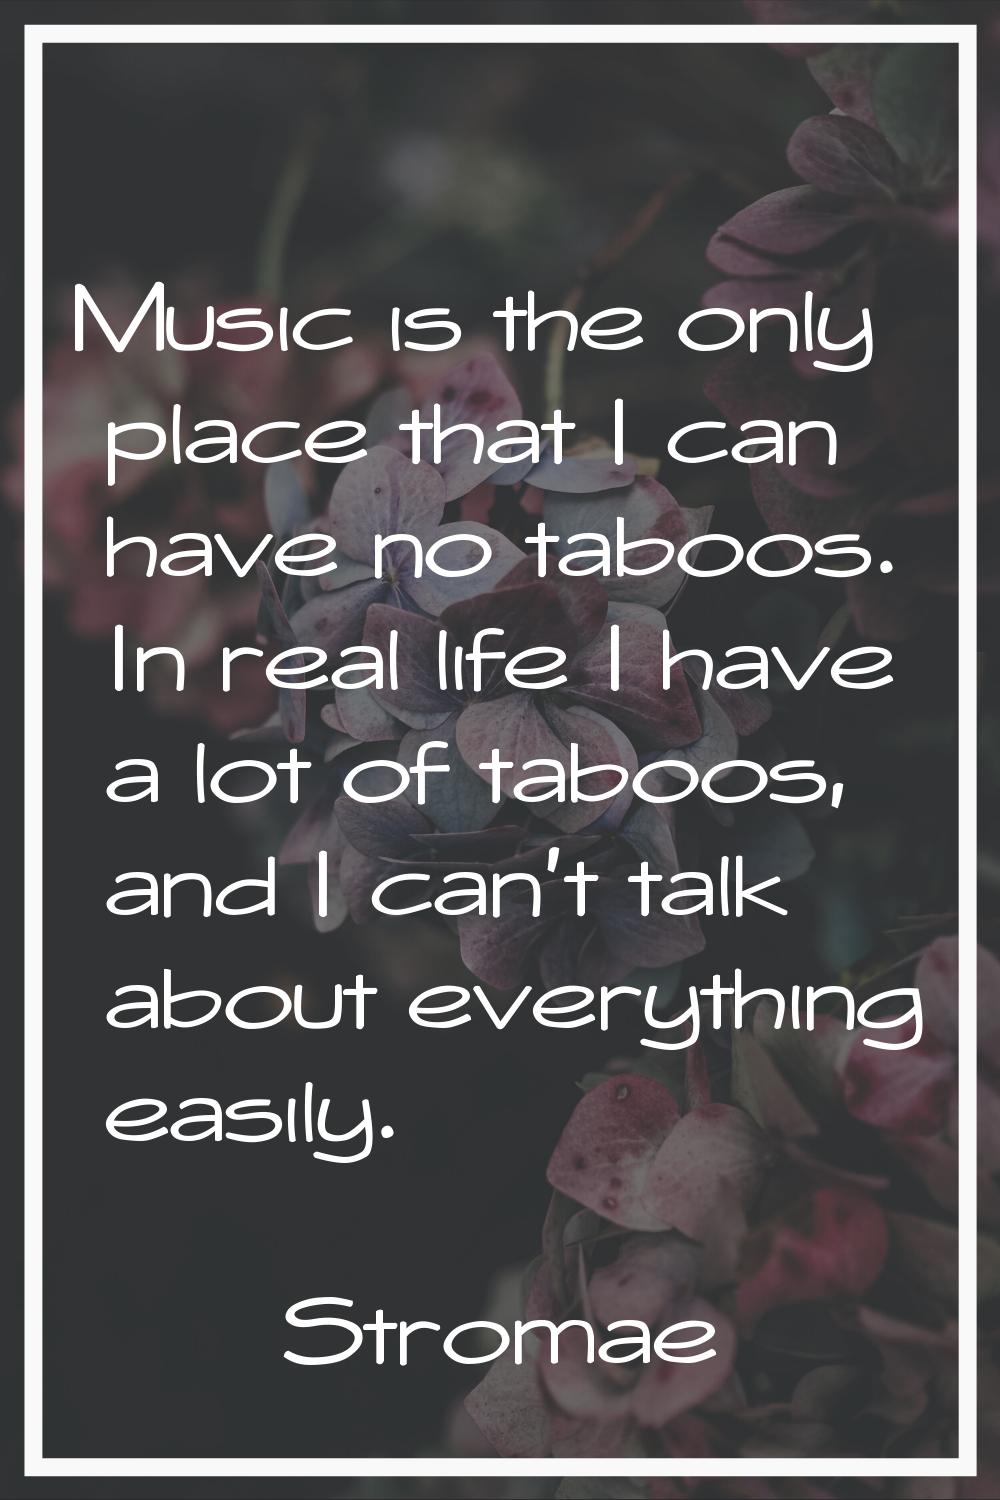 Music is the only place that I can have no taboos. In real life I have a lot of taboos, and I can't